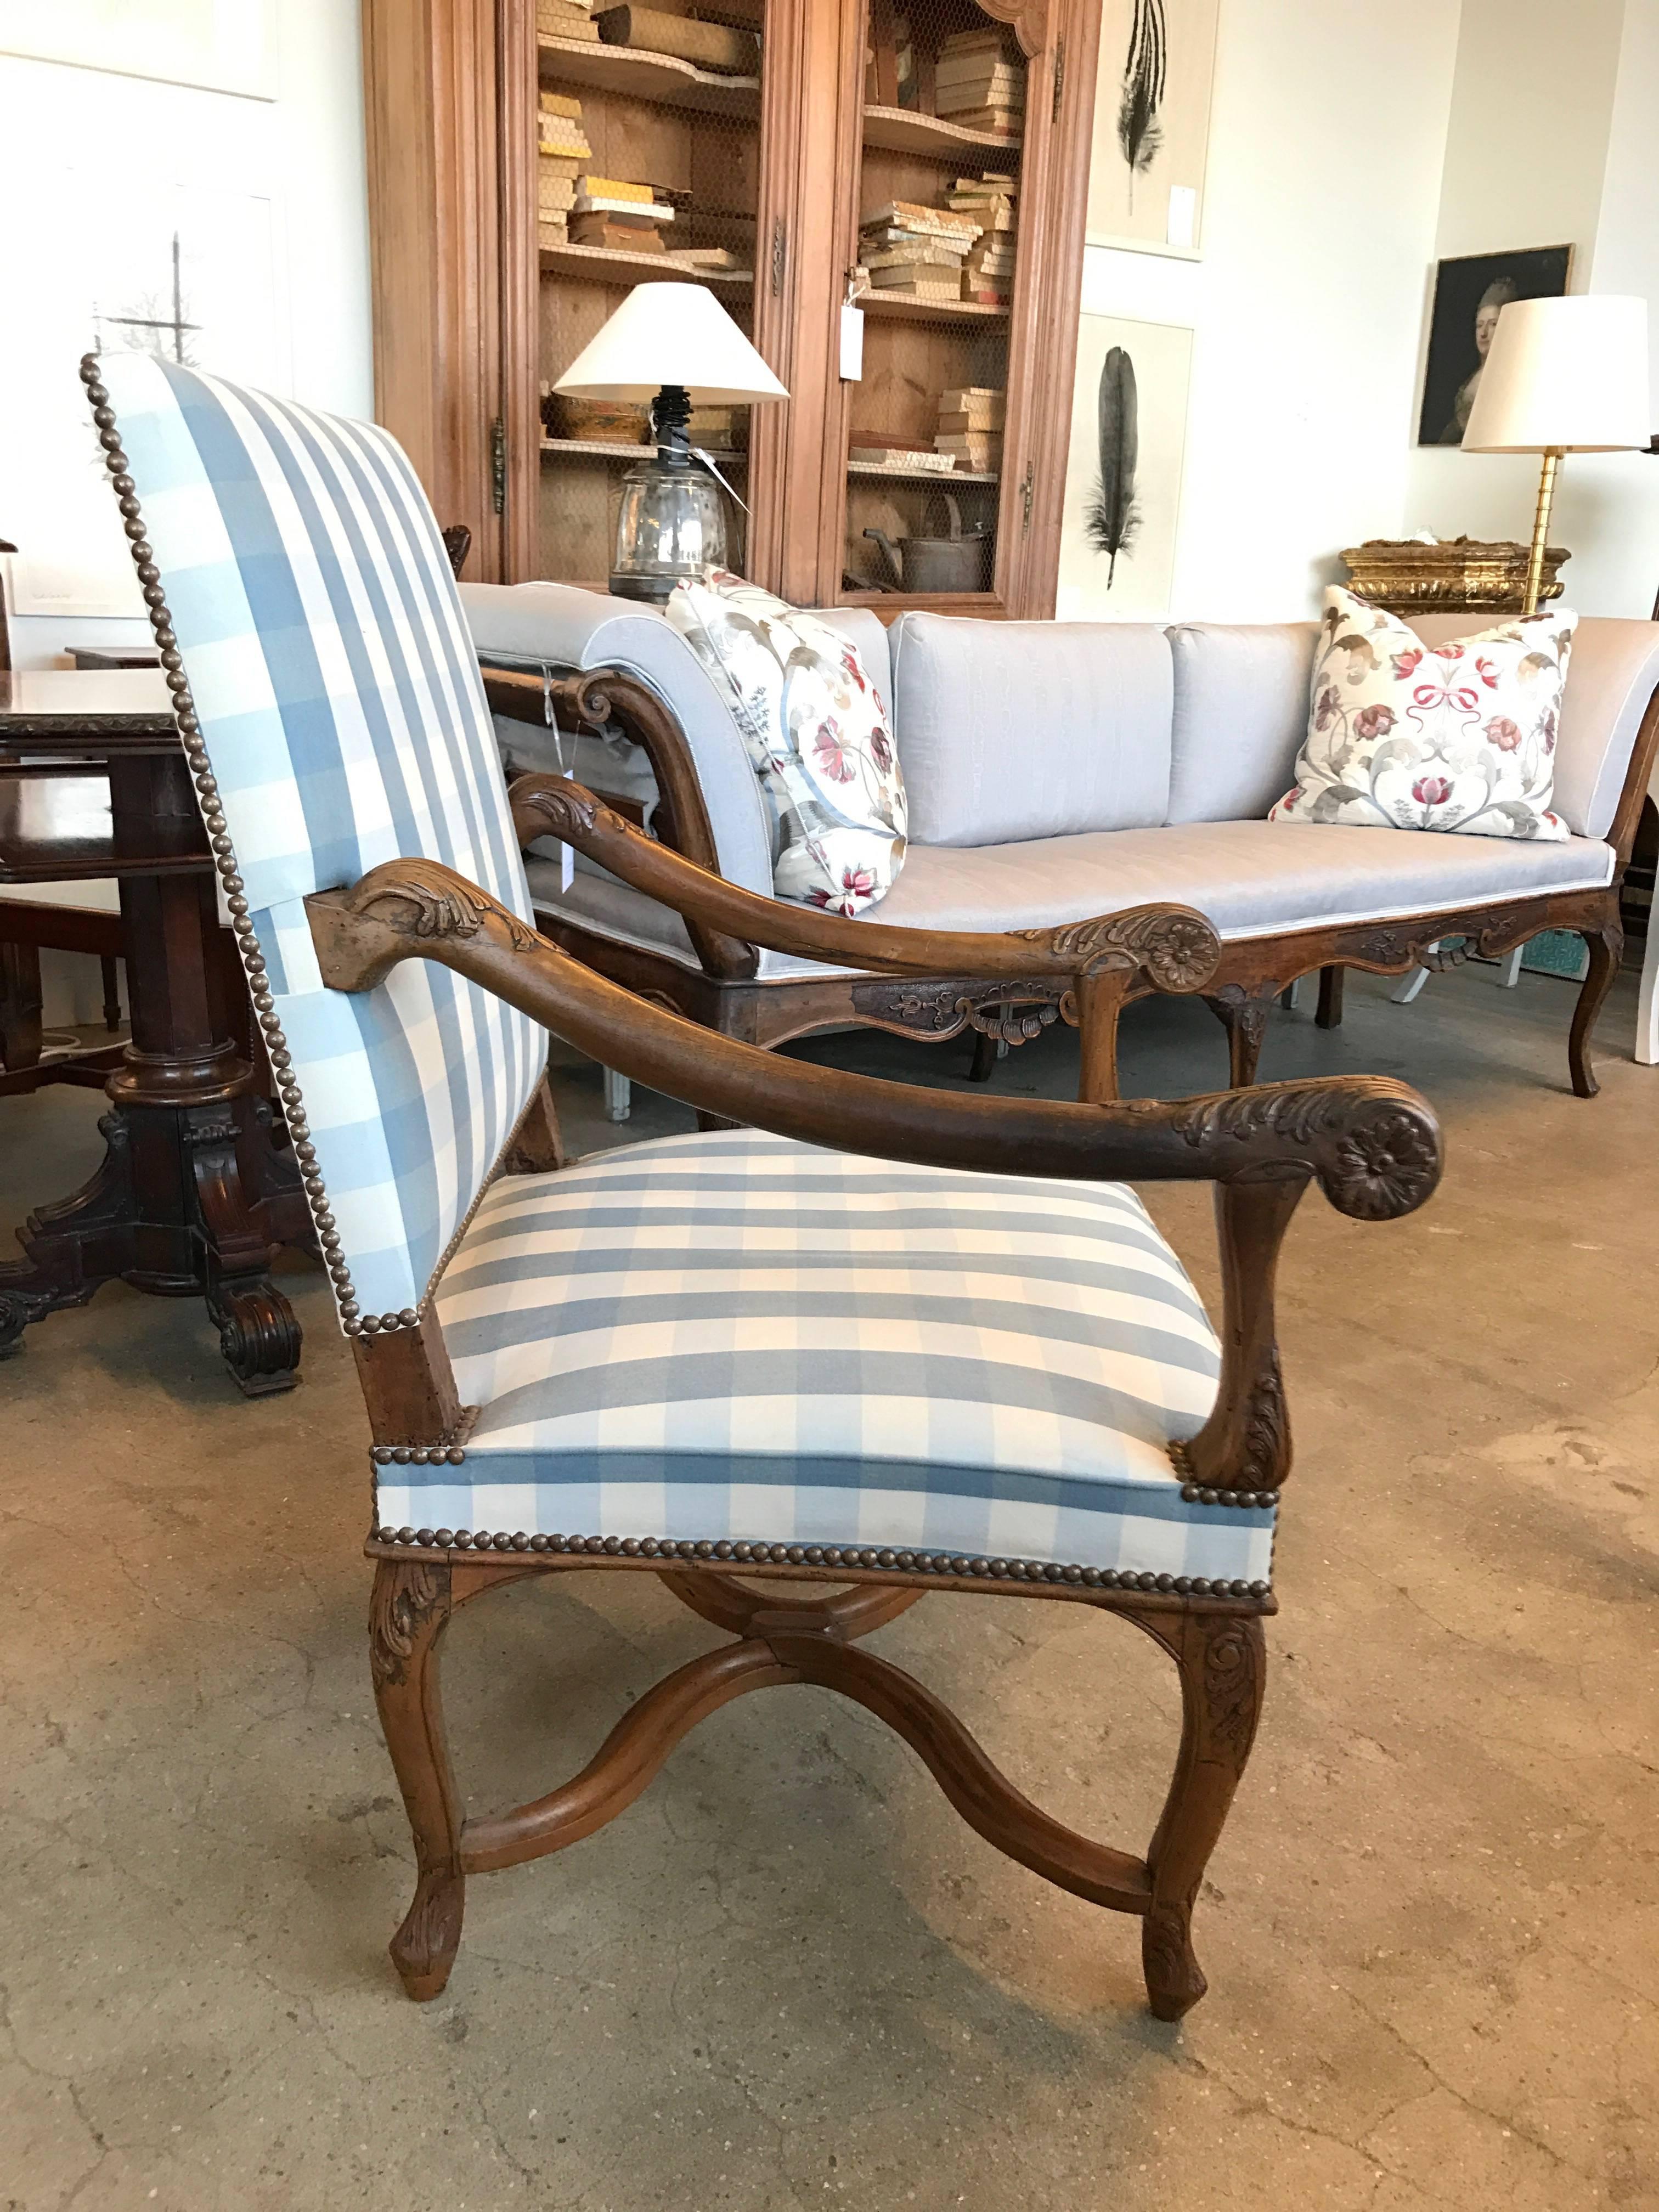 19th century French walnut armchair with blue and white check fabric.